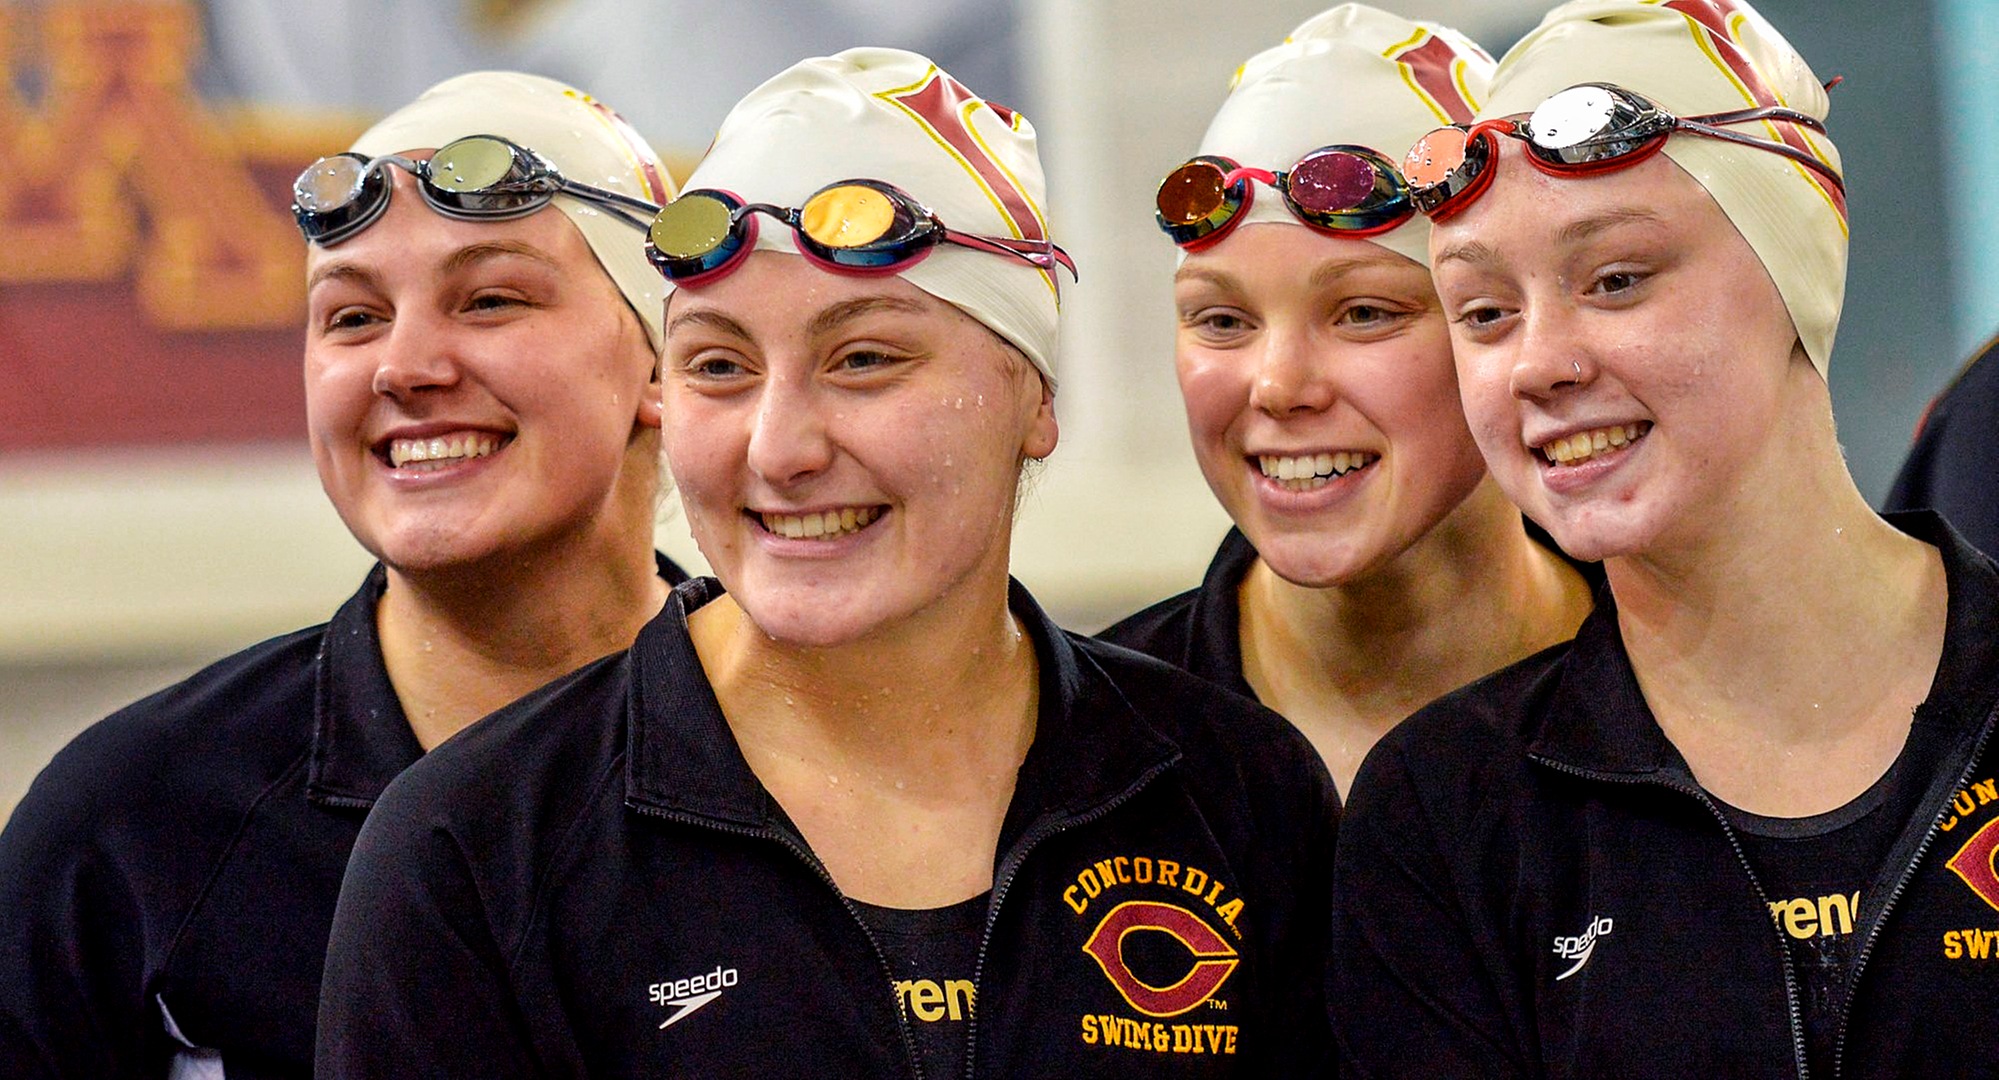 The Concordia 800-yard freestyle relay team is all smiles after posting a season-best time by almost 14 seconds.